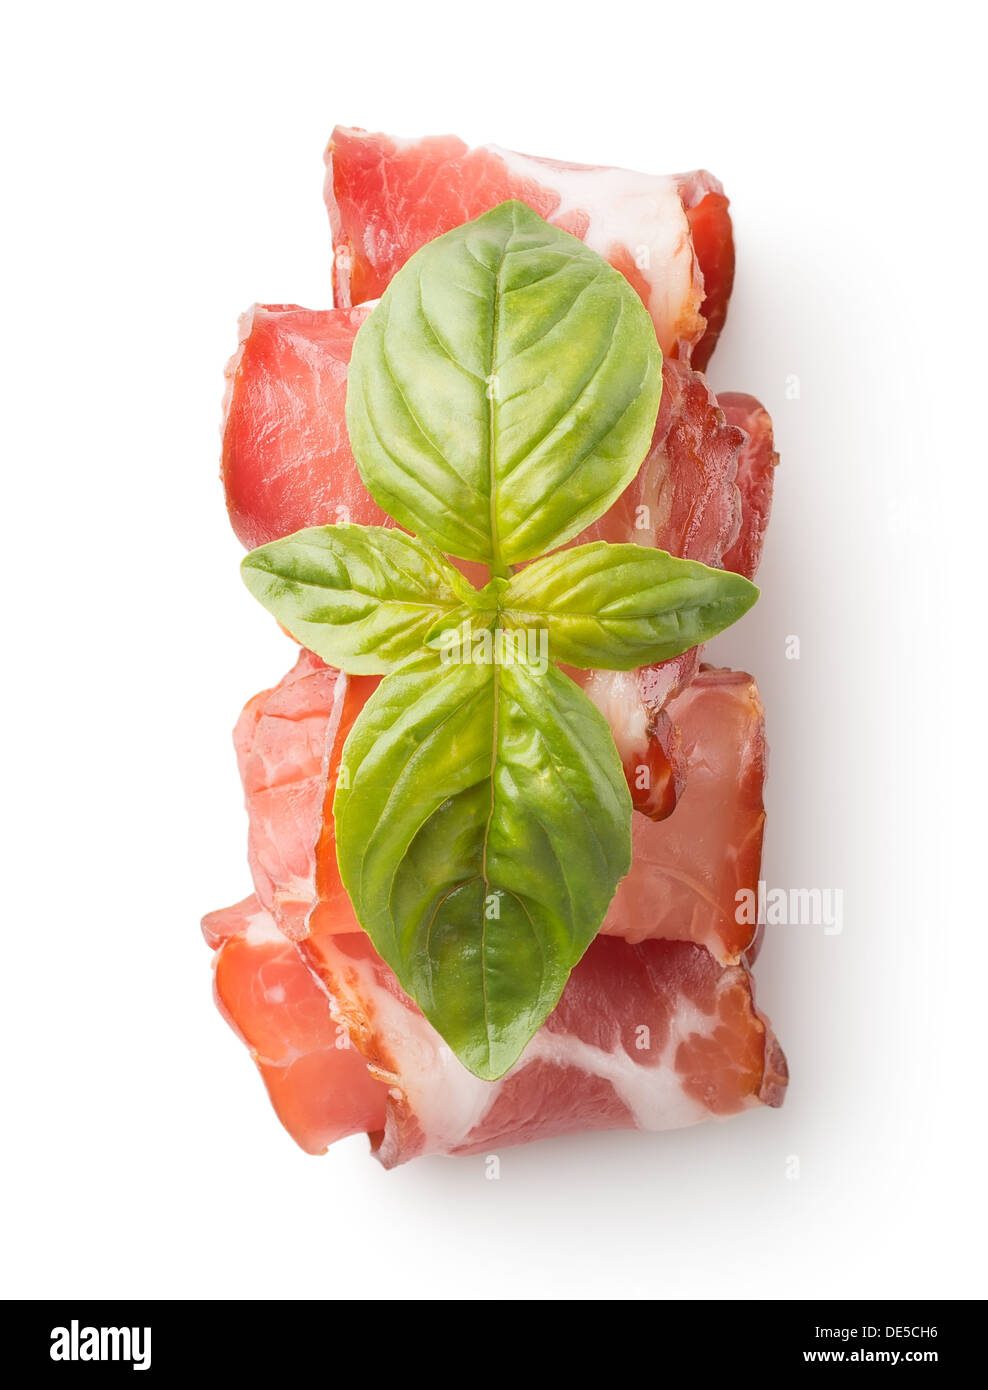 Appetizing bacon with herbs isolated on a white background Stock Photo